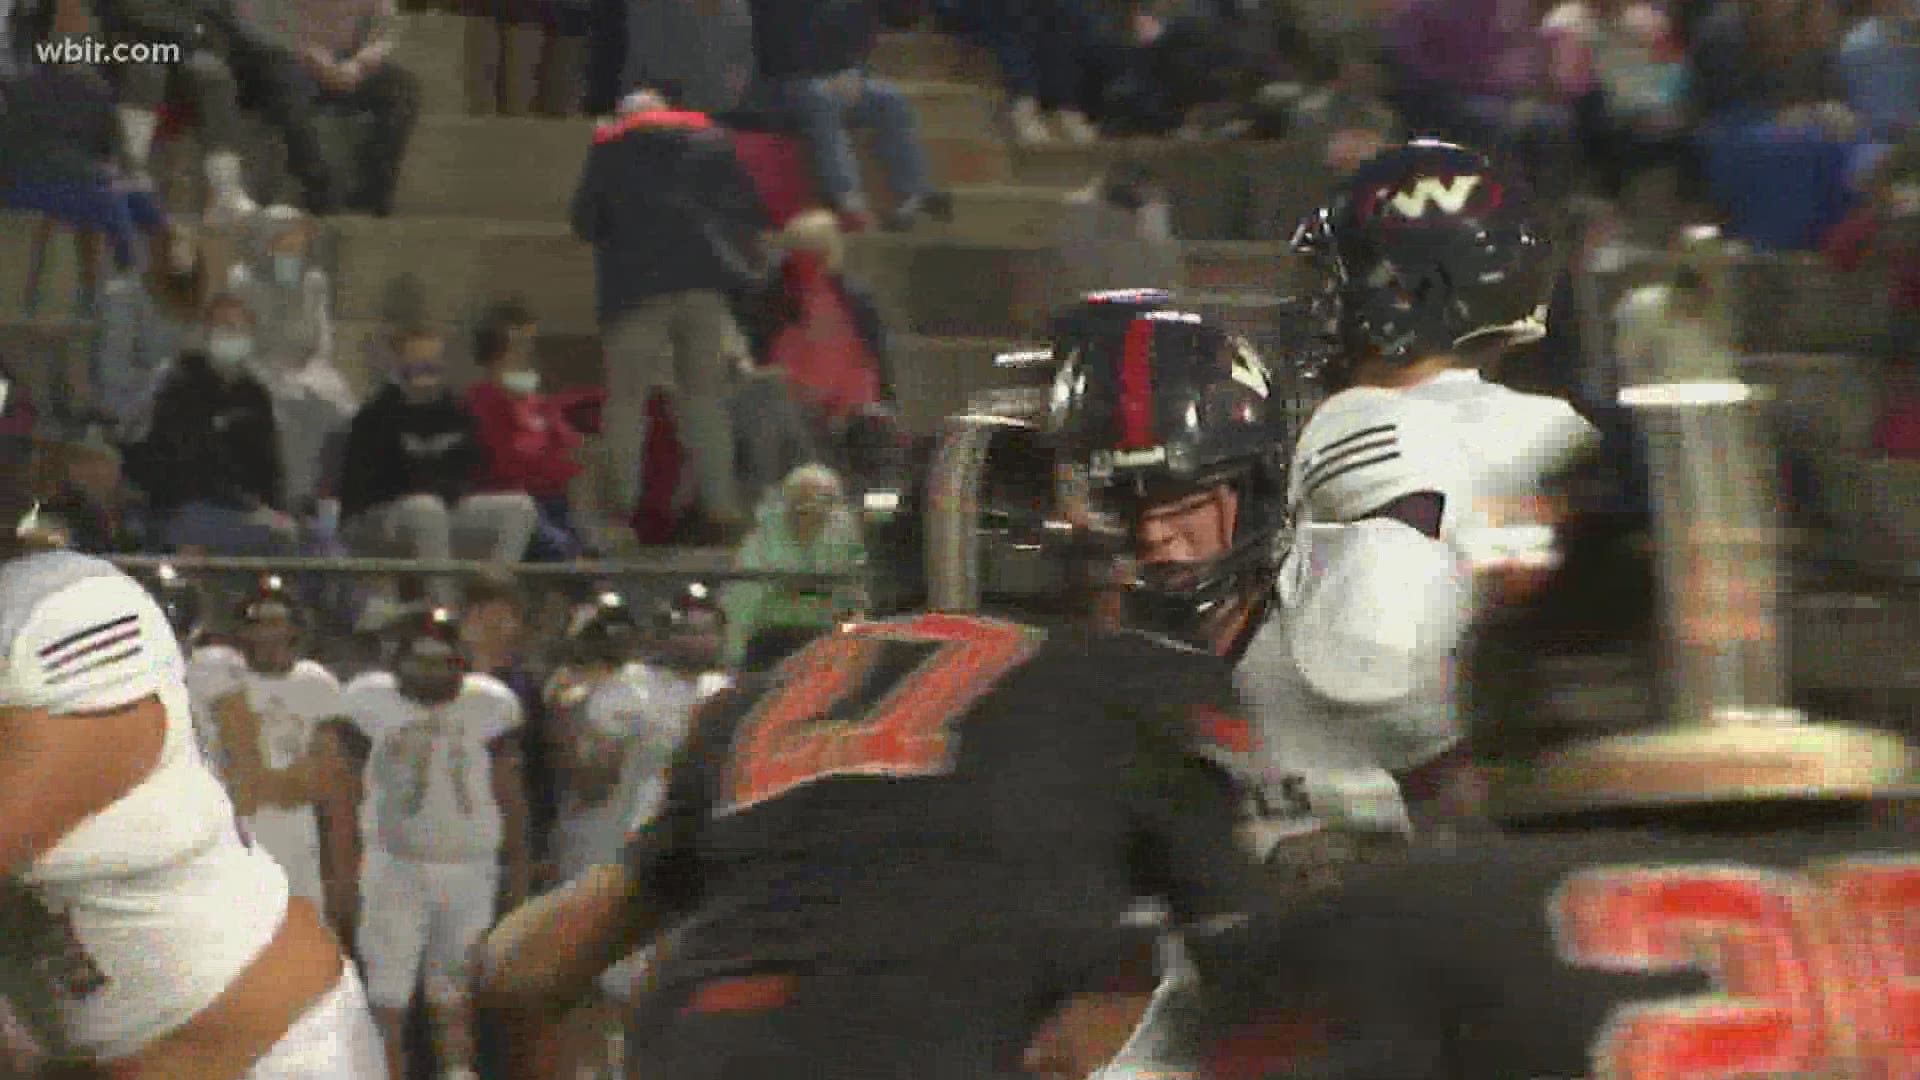 West stays undefeated with a 42-unanswered points against Clinton.